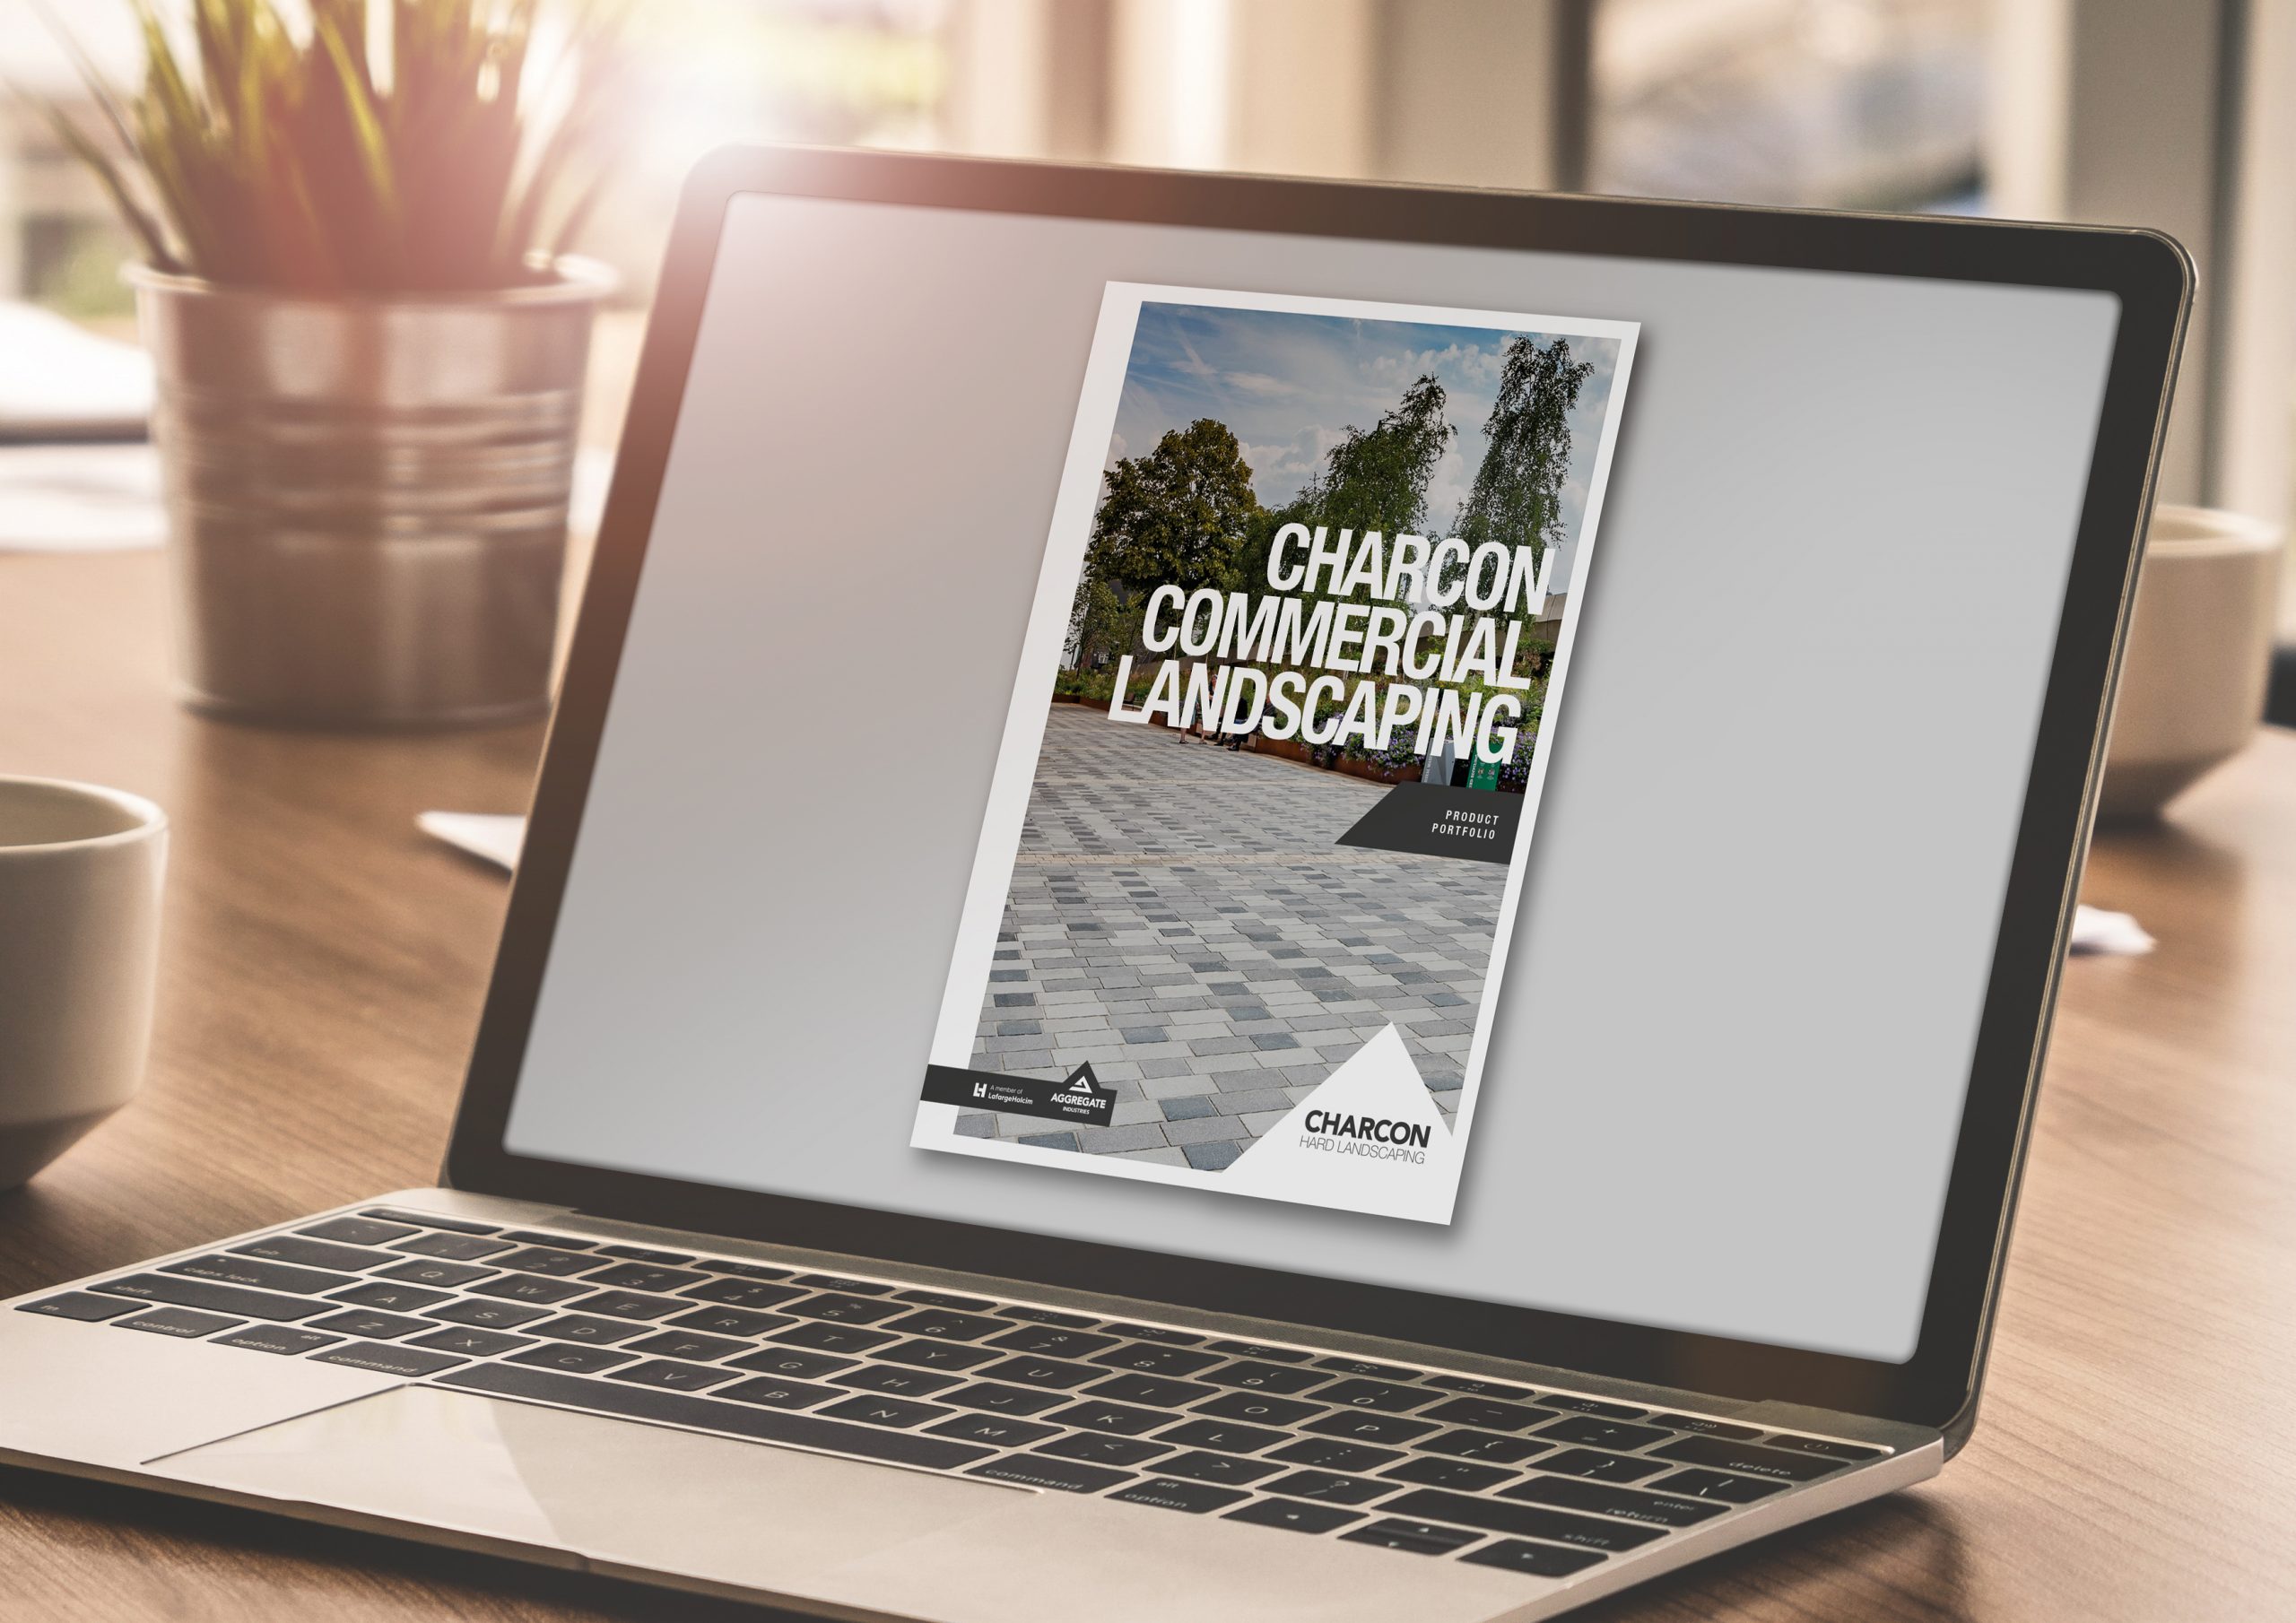 Charcon showcases hard landscaping offering in new downloadable brochure @AggregateUK